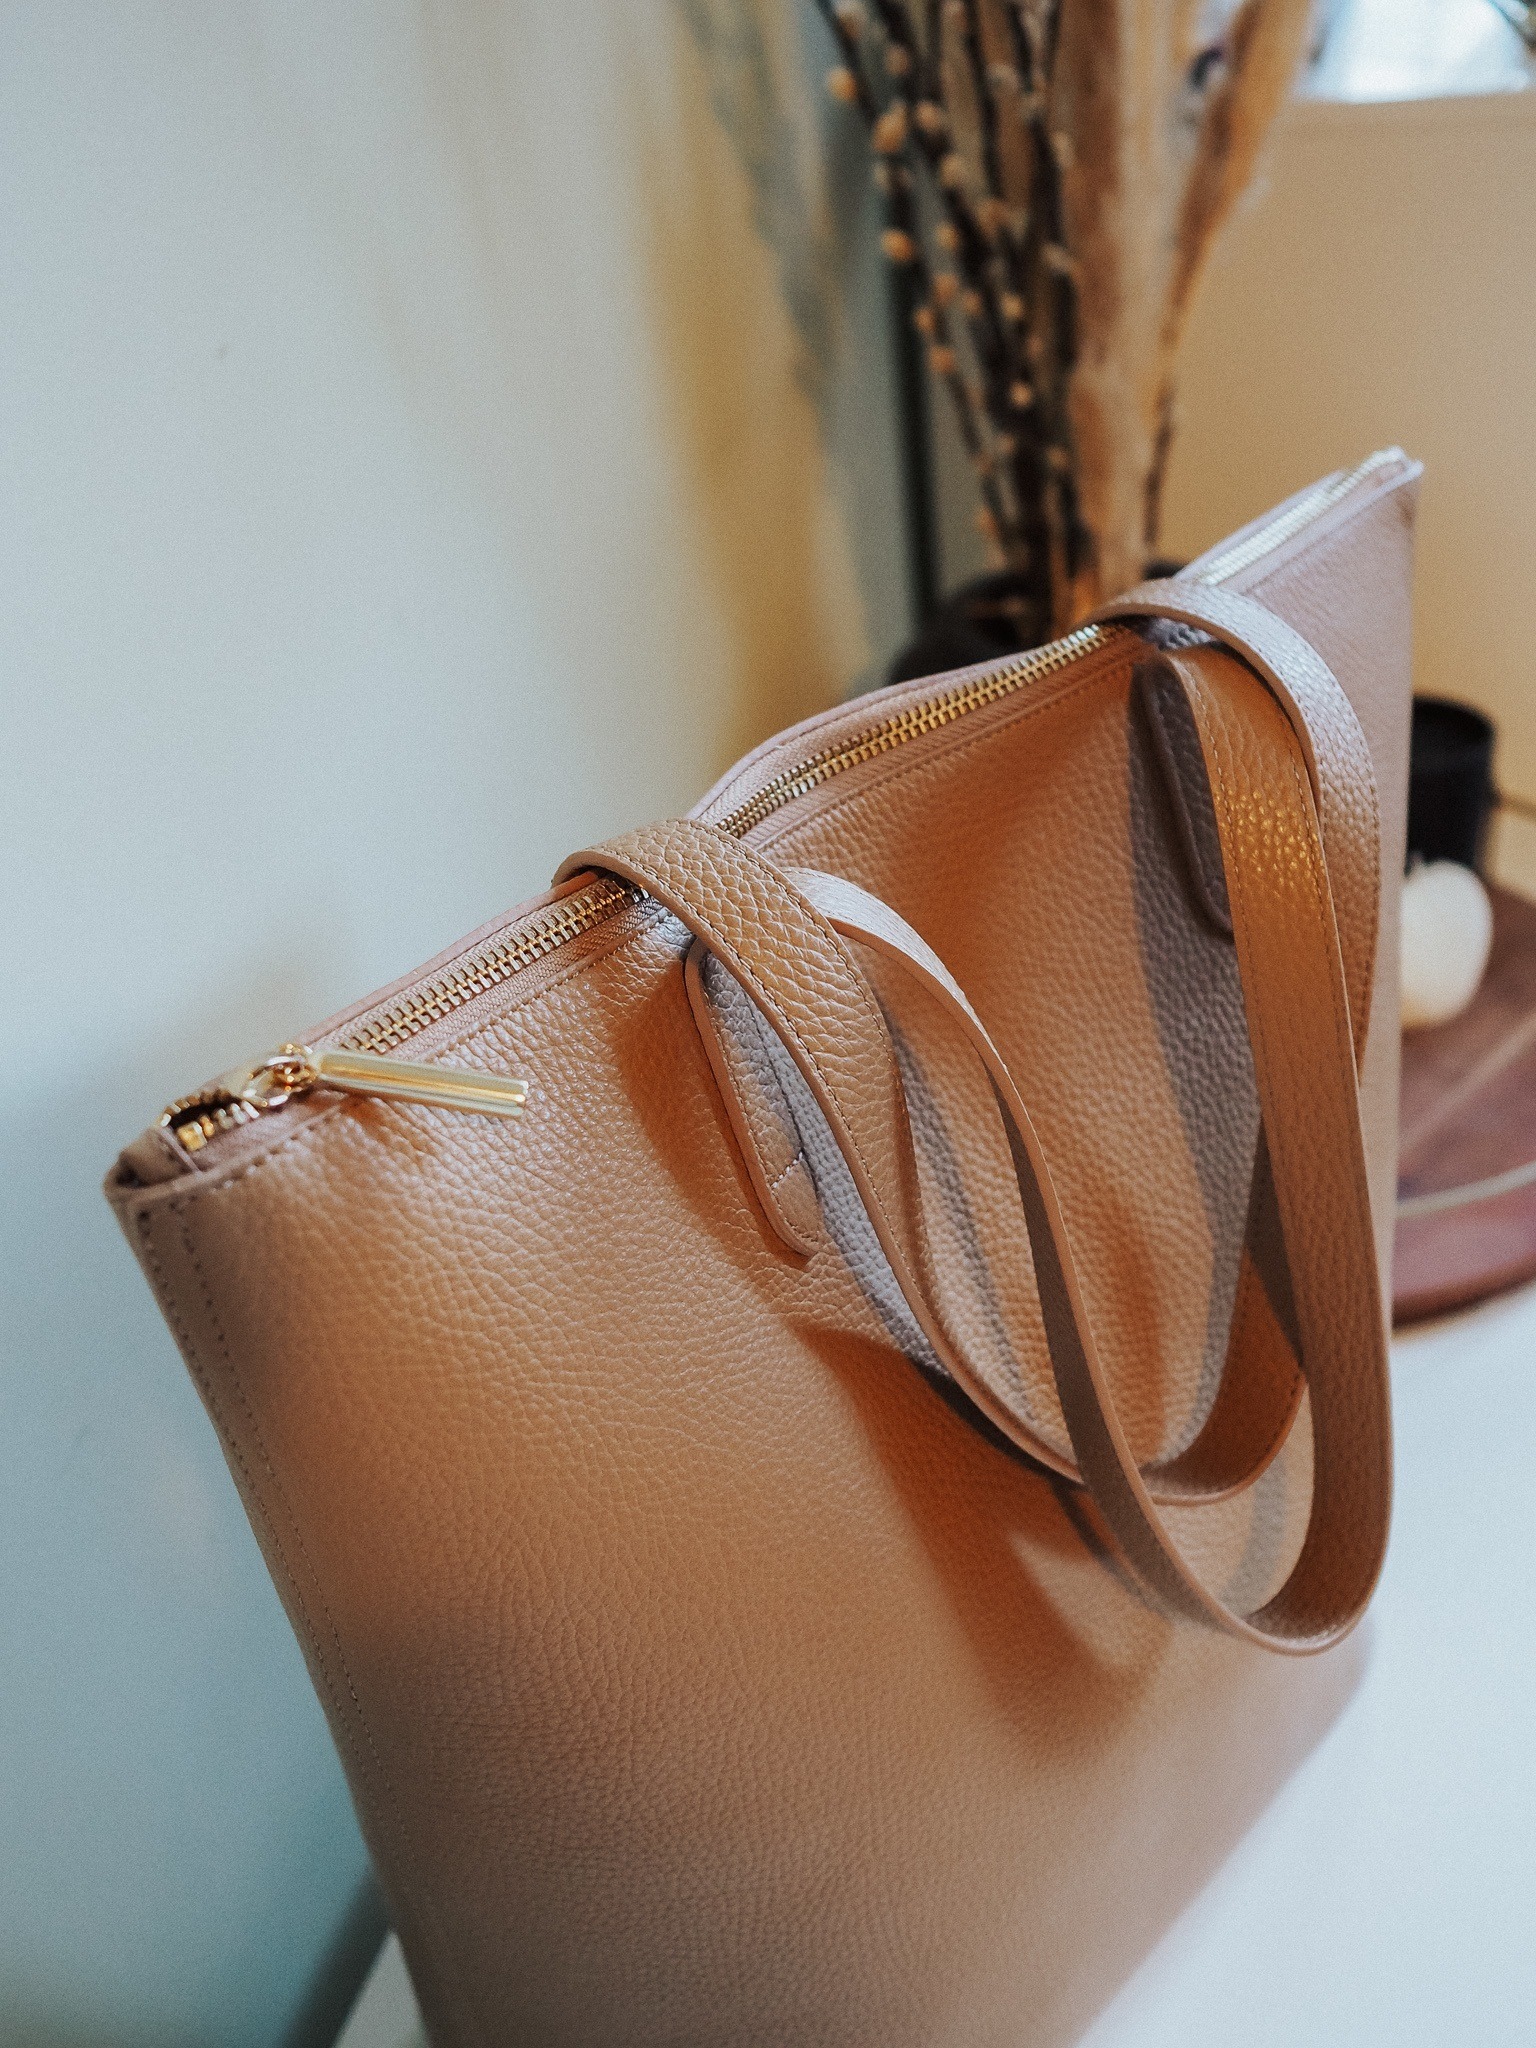 Comparing the Cuyana, Everlane, and Madewell Totes - by Kelsey Boyanzhu